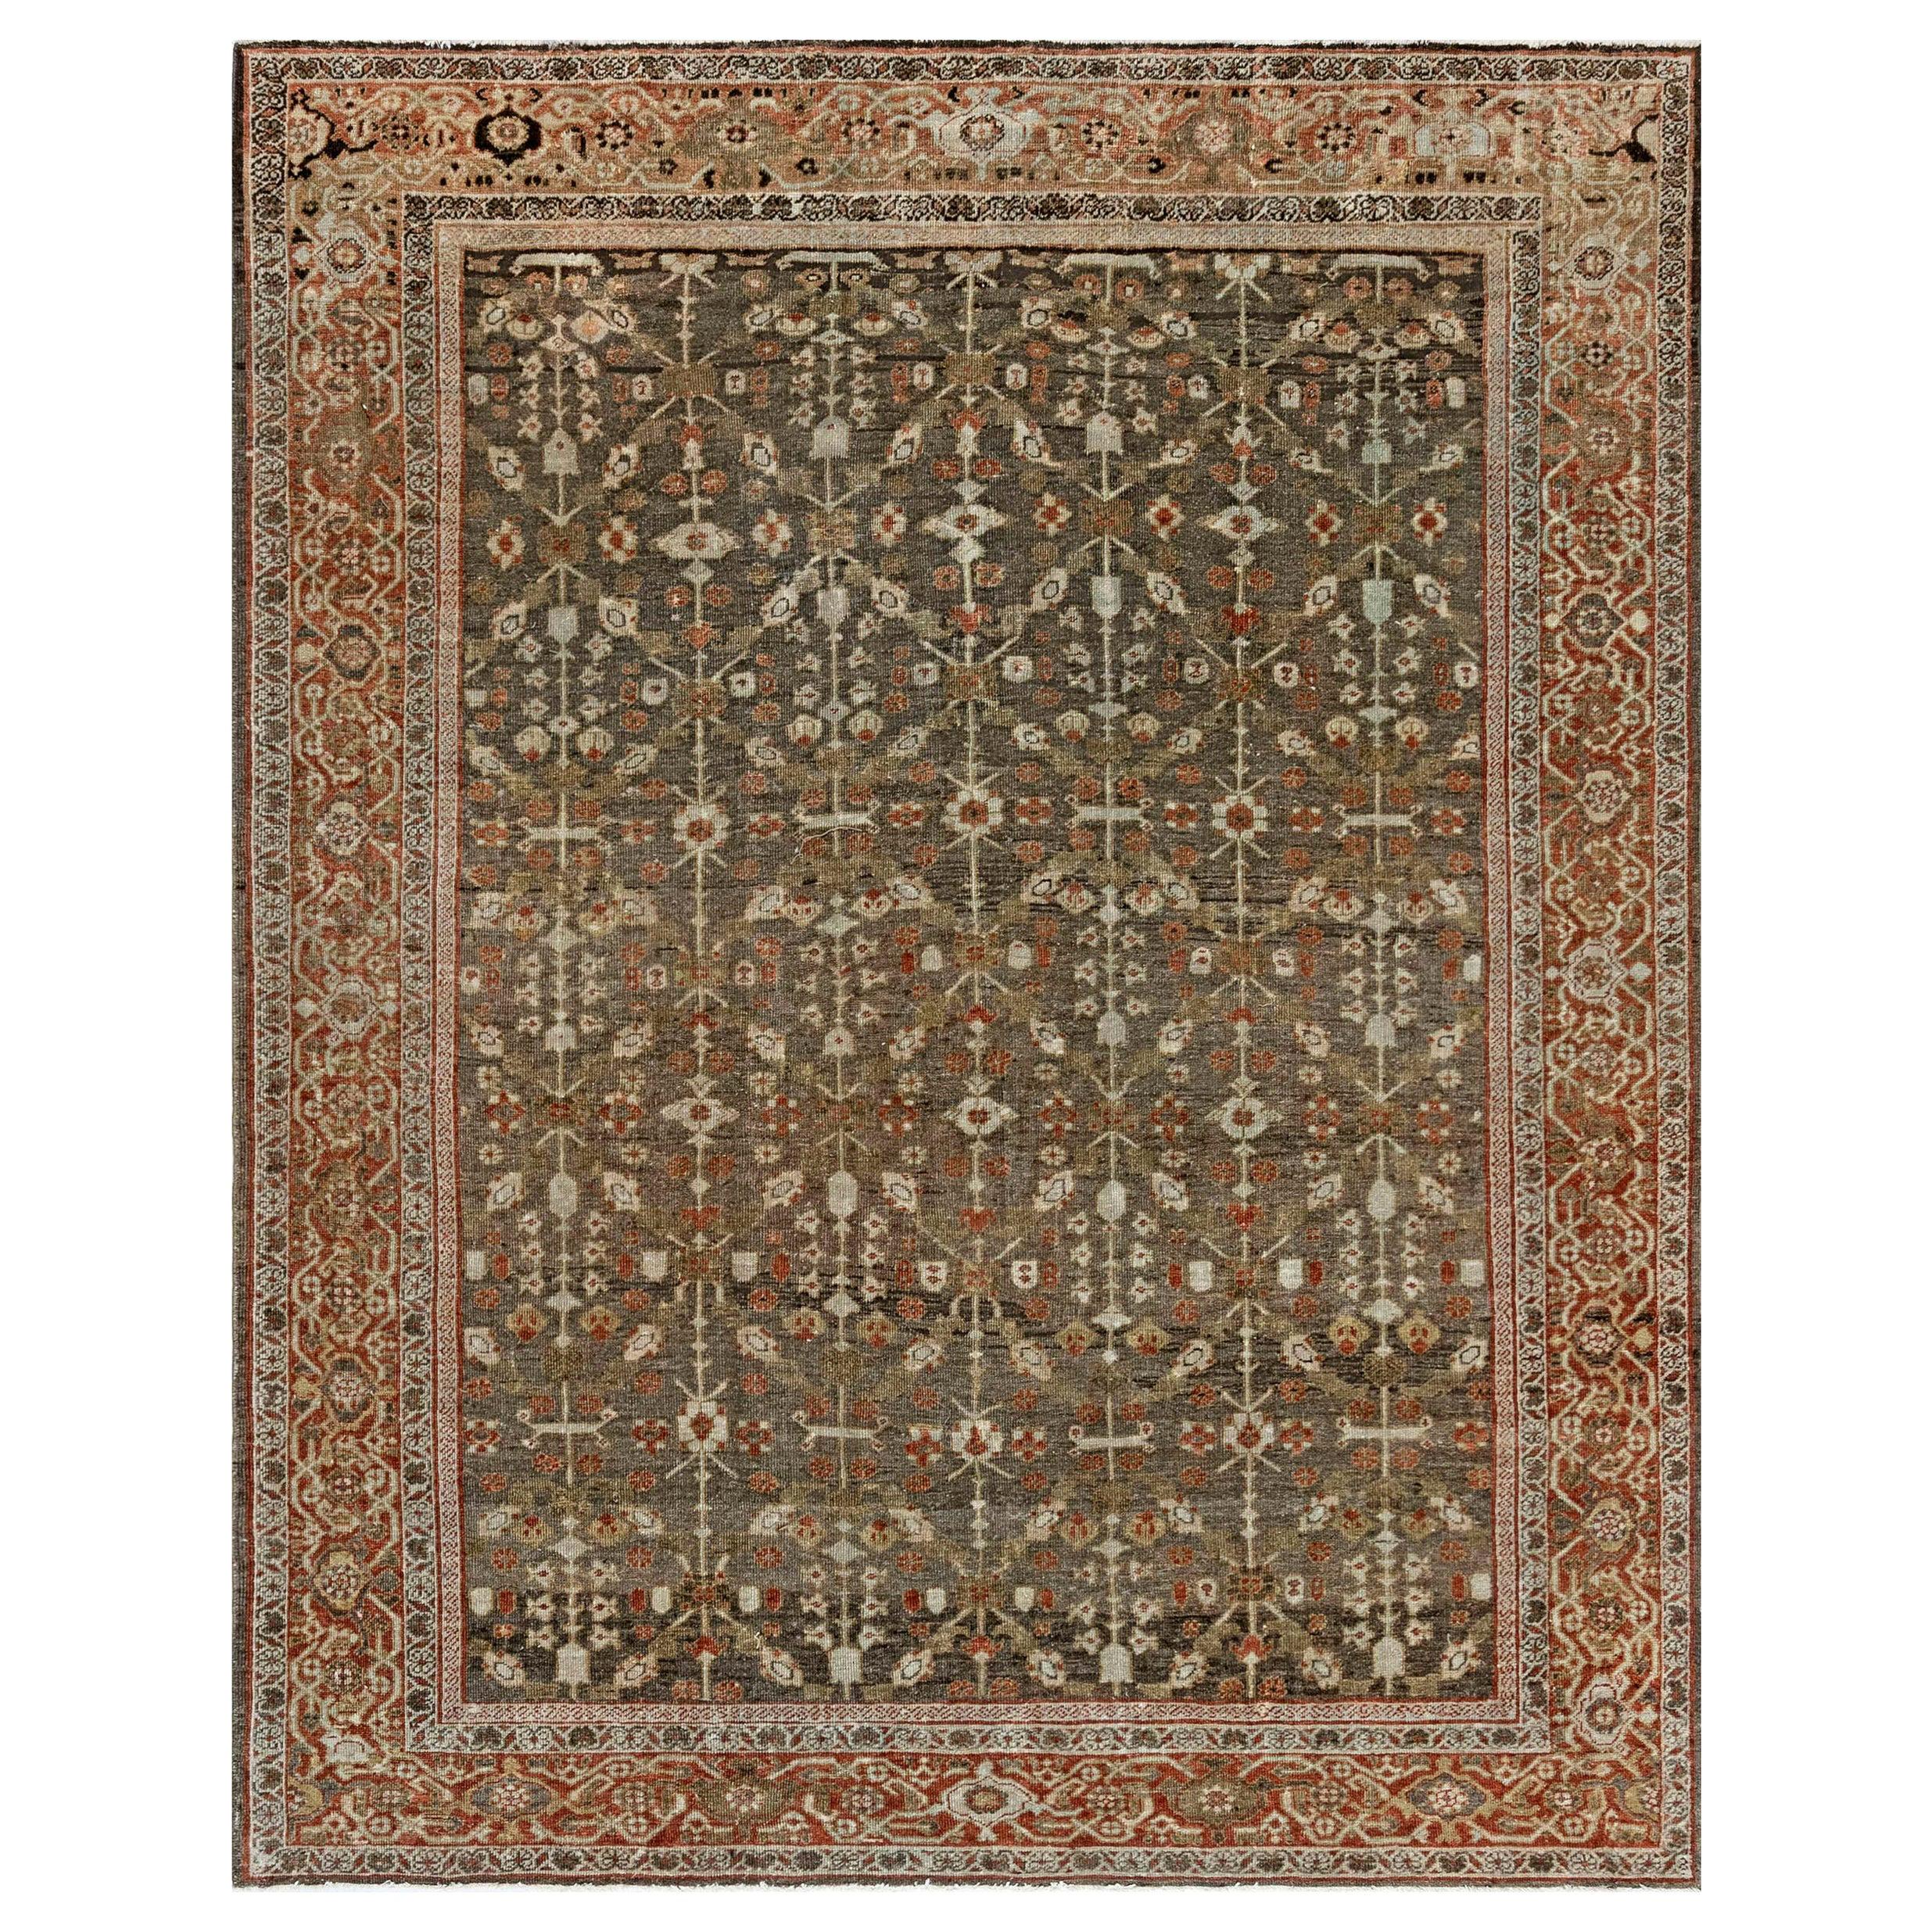 Antique Persian Sultanabad Muted Beige, Brown, Green and Orange Wool Rug